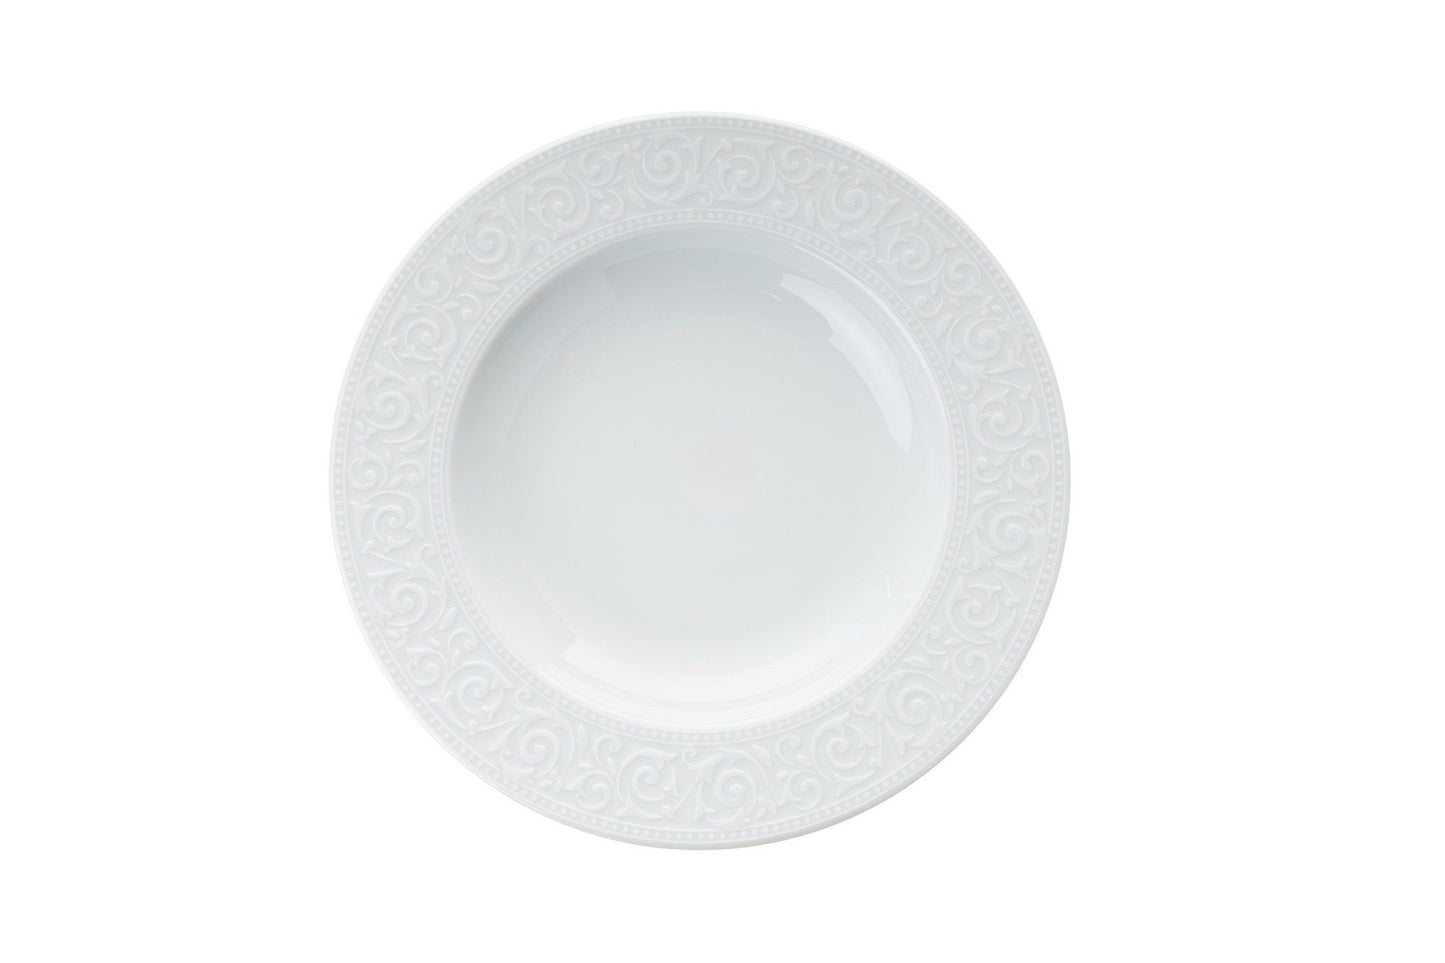 ACL18Y400 - Dinner Set (18 Pieces)